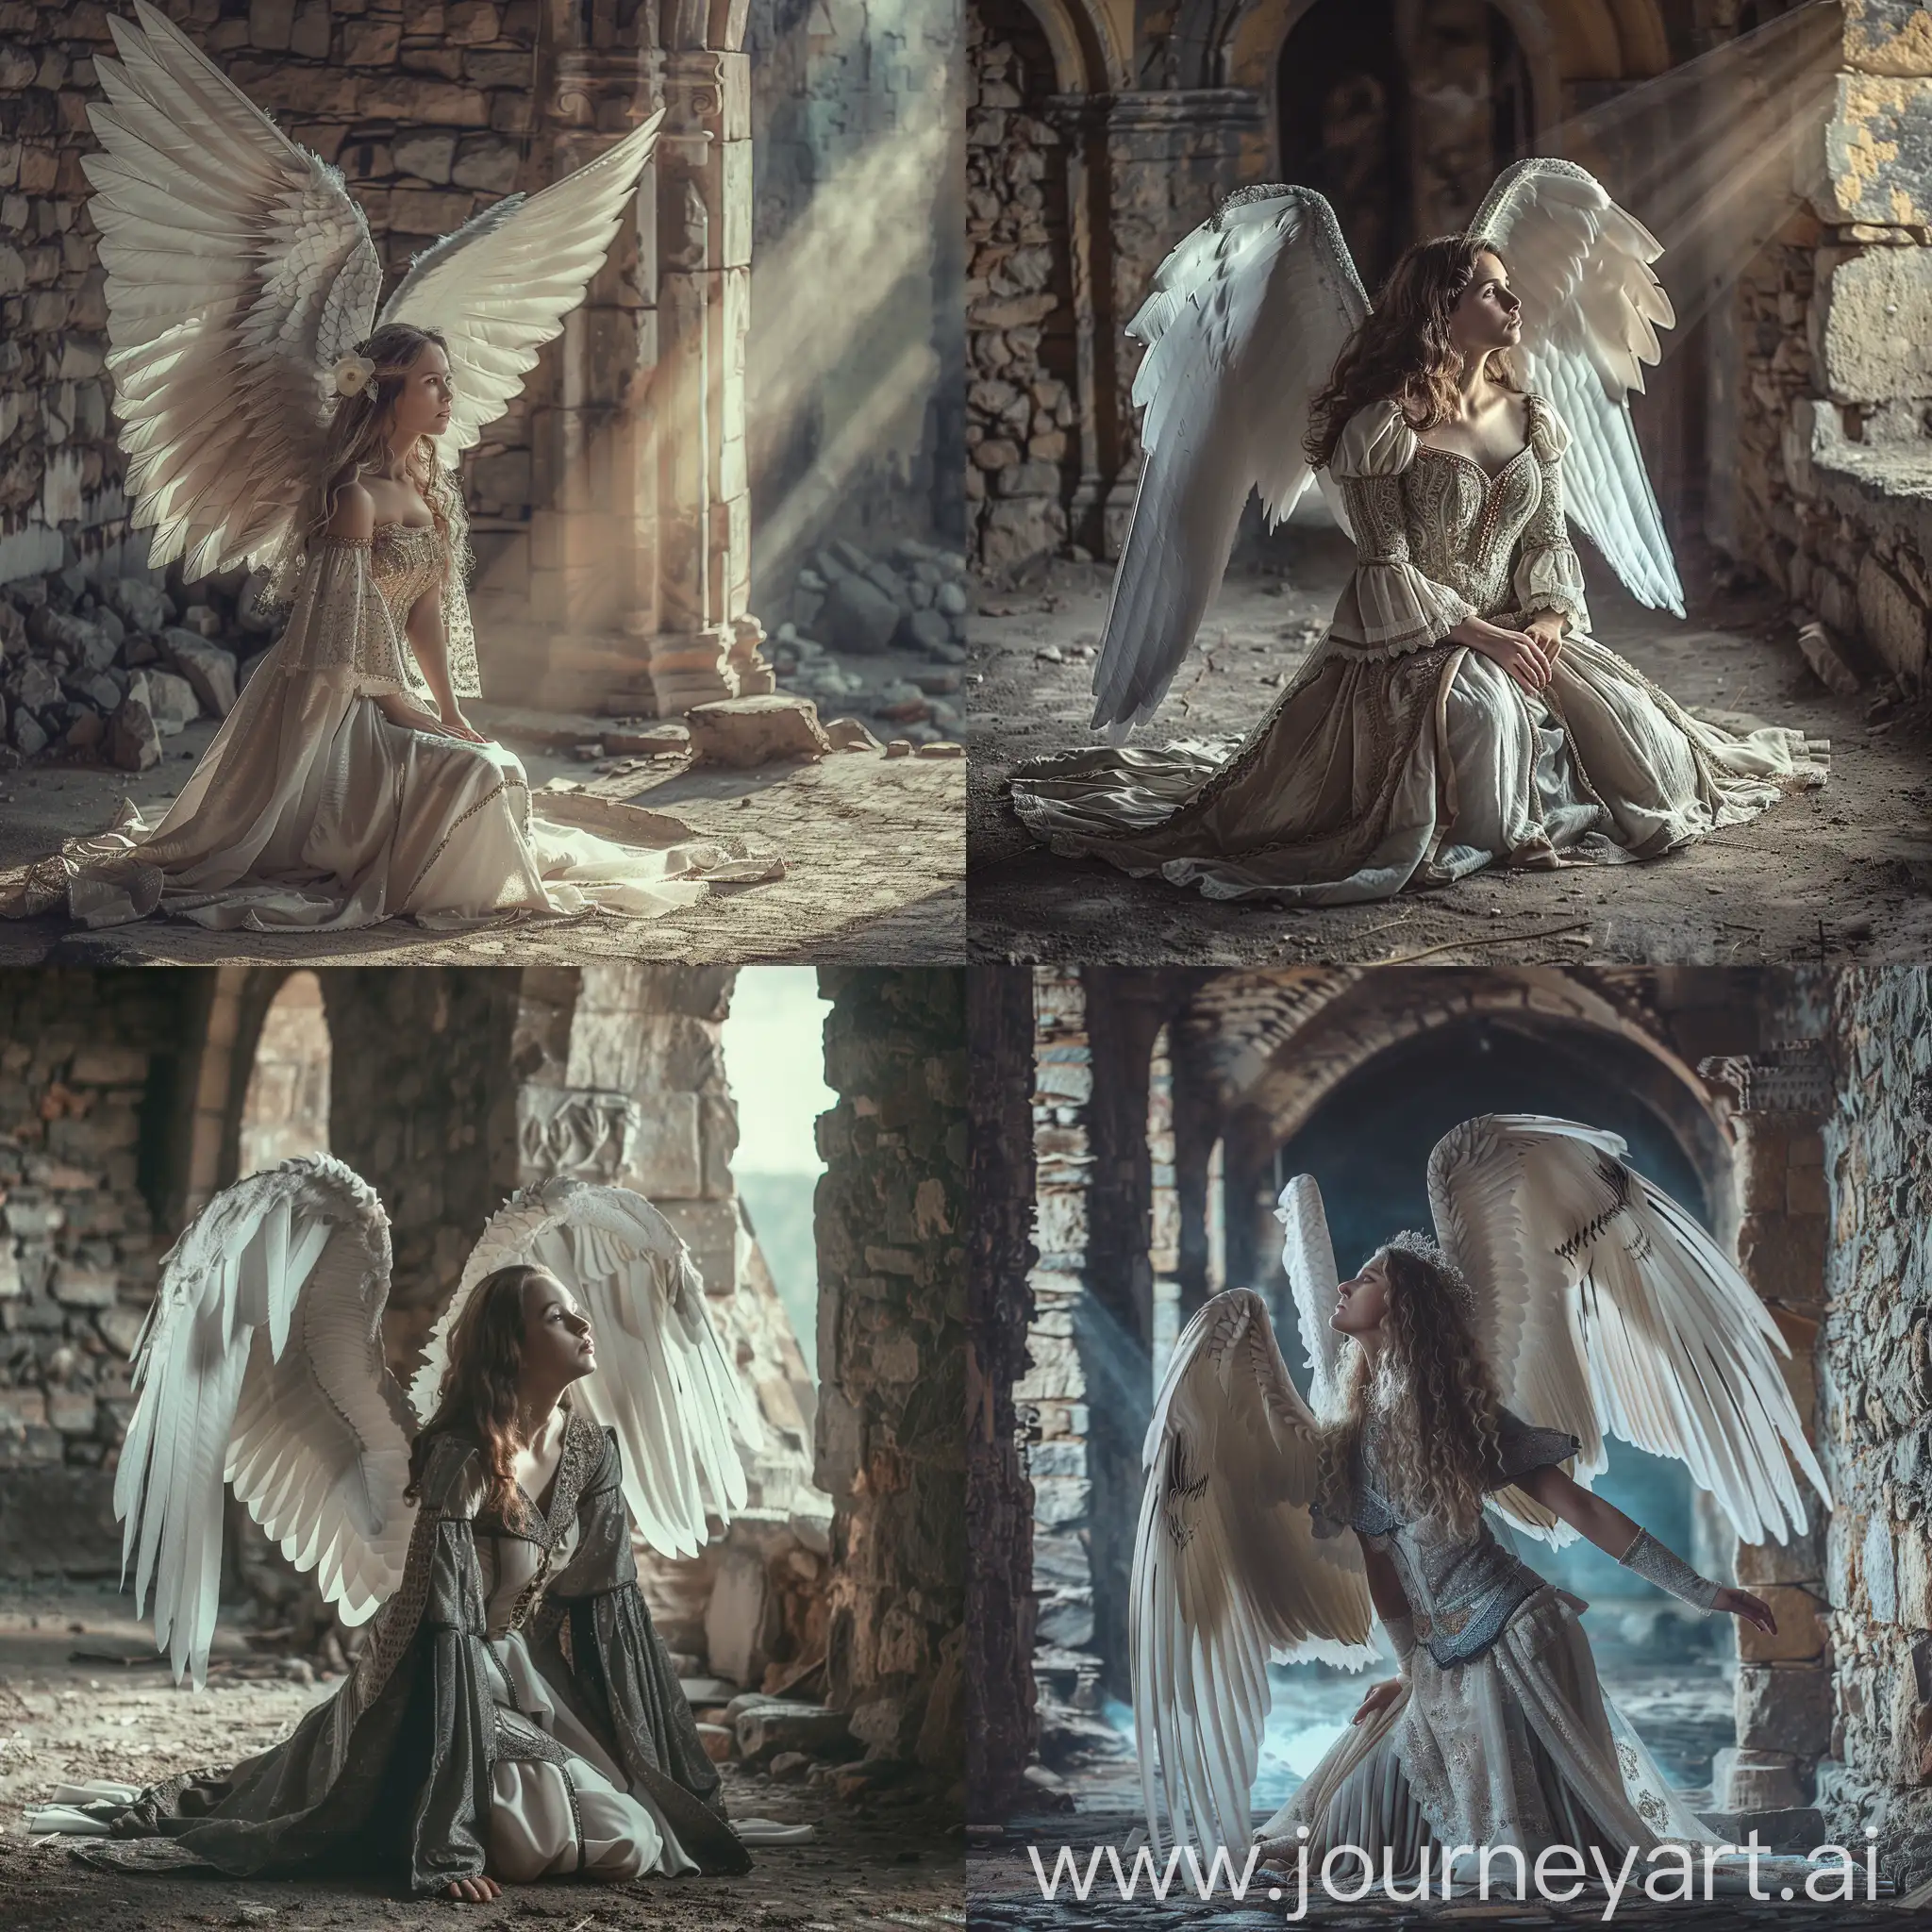 Angelic-Woman-in-Medieval-Dress-Praying-in-Ancient-Stone-Castle